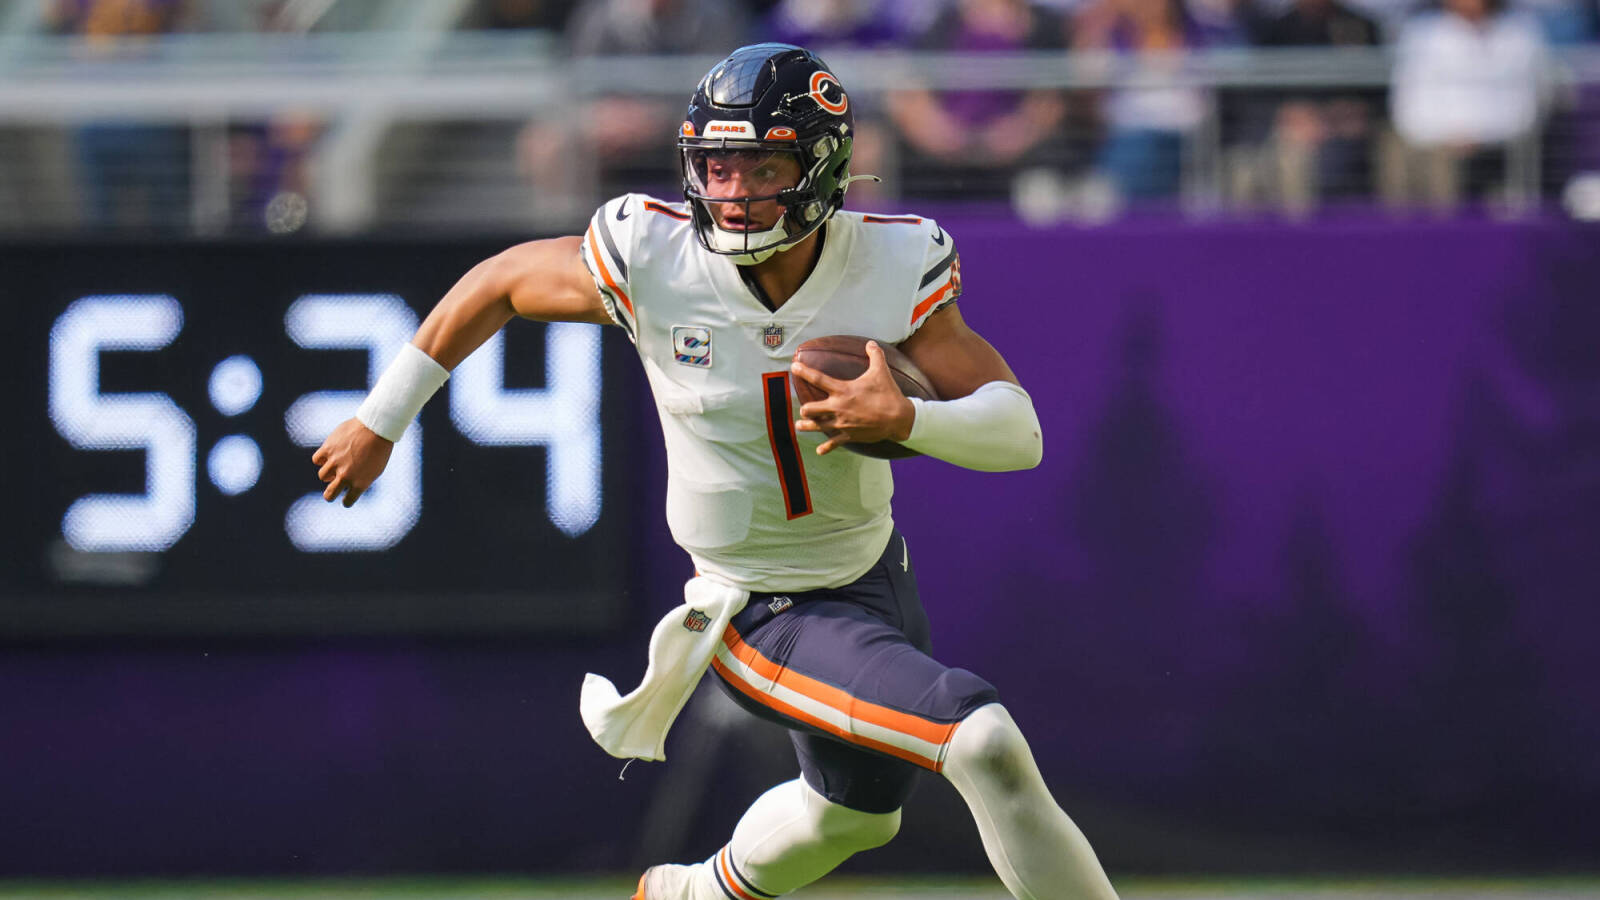 Justin Fields of the Bears displays growth by “remaining calm”